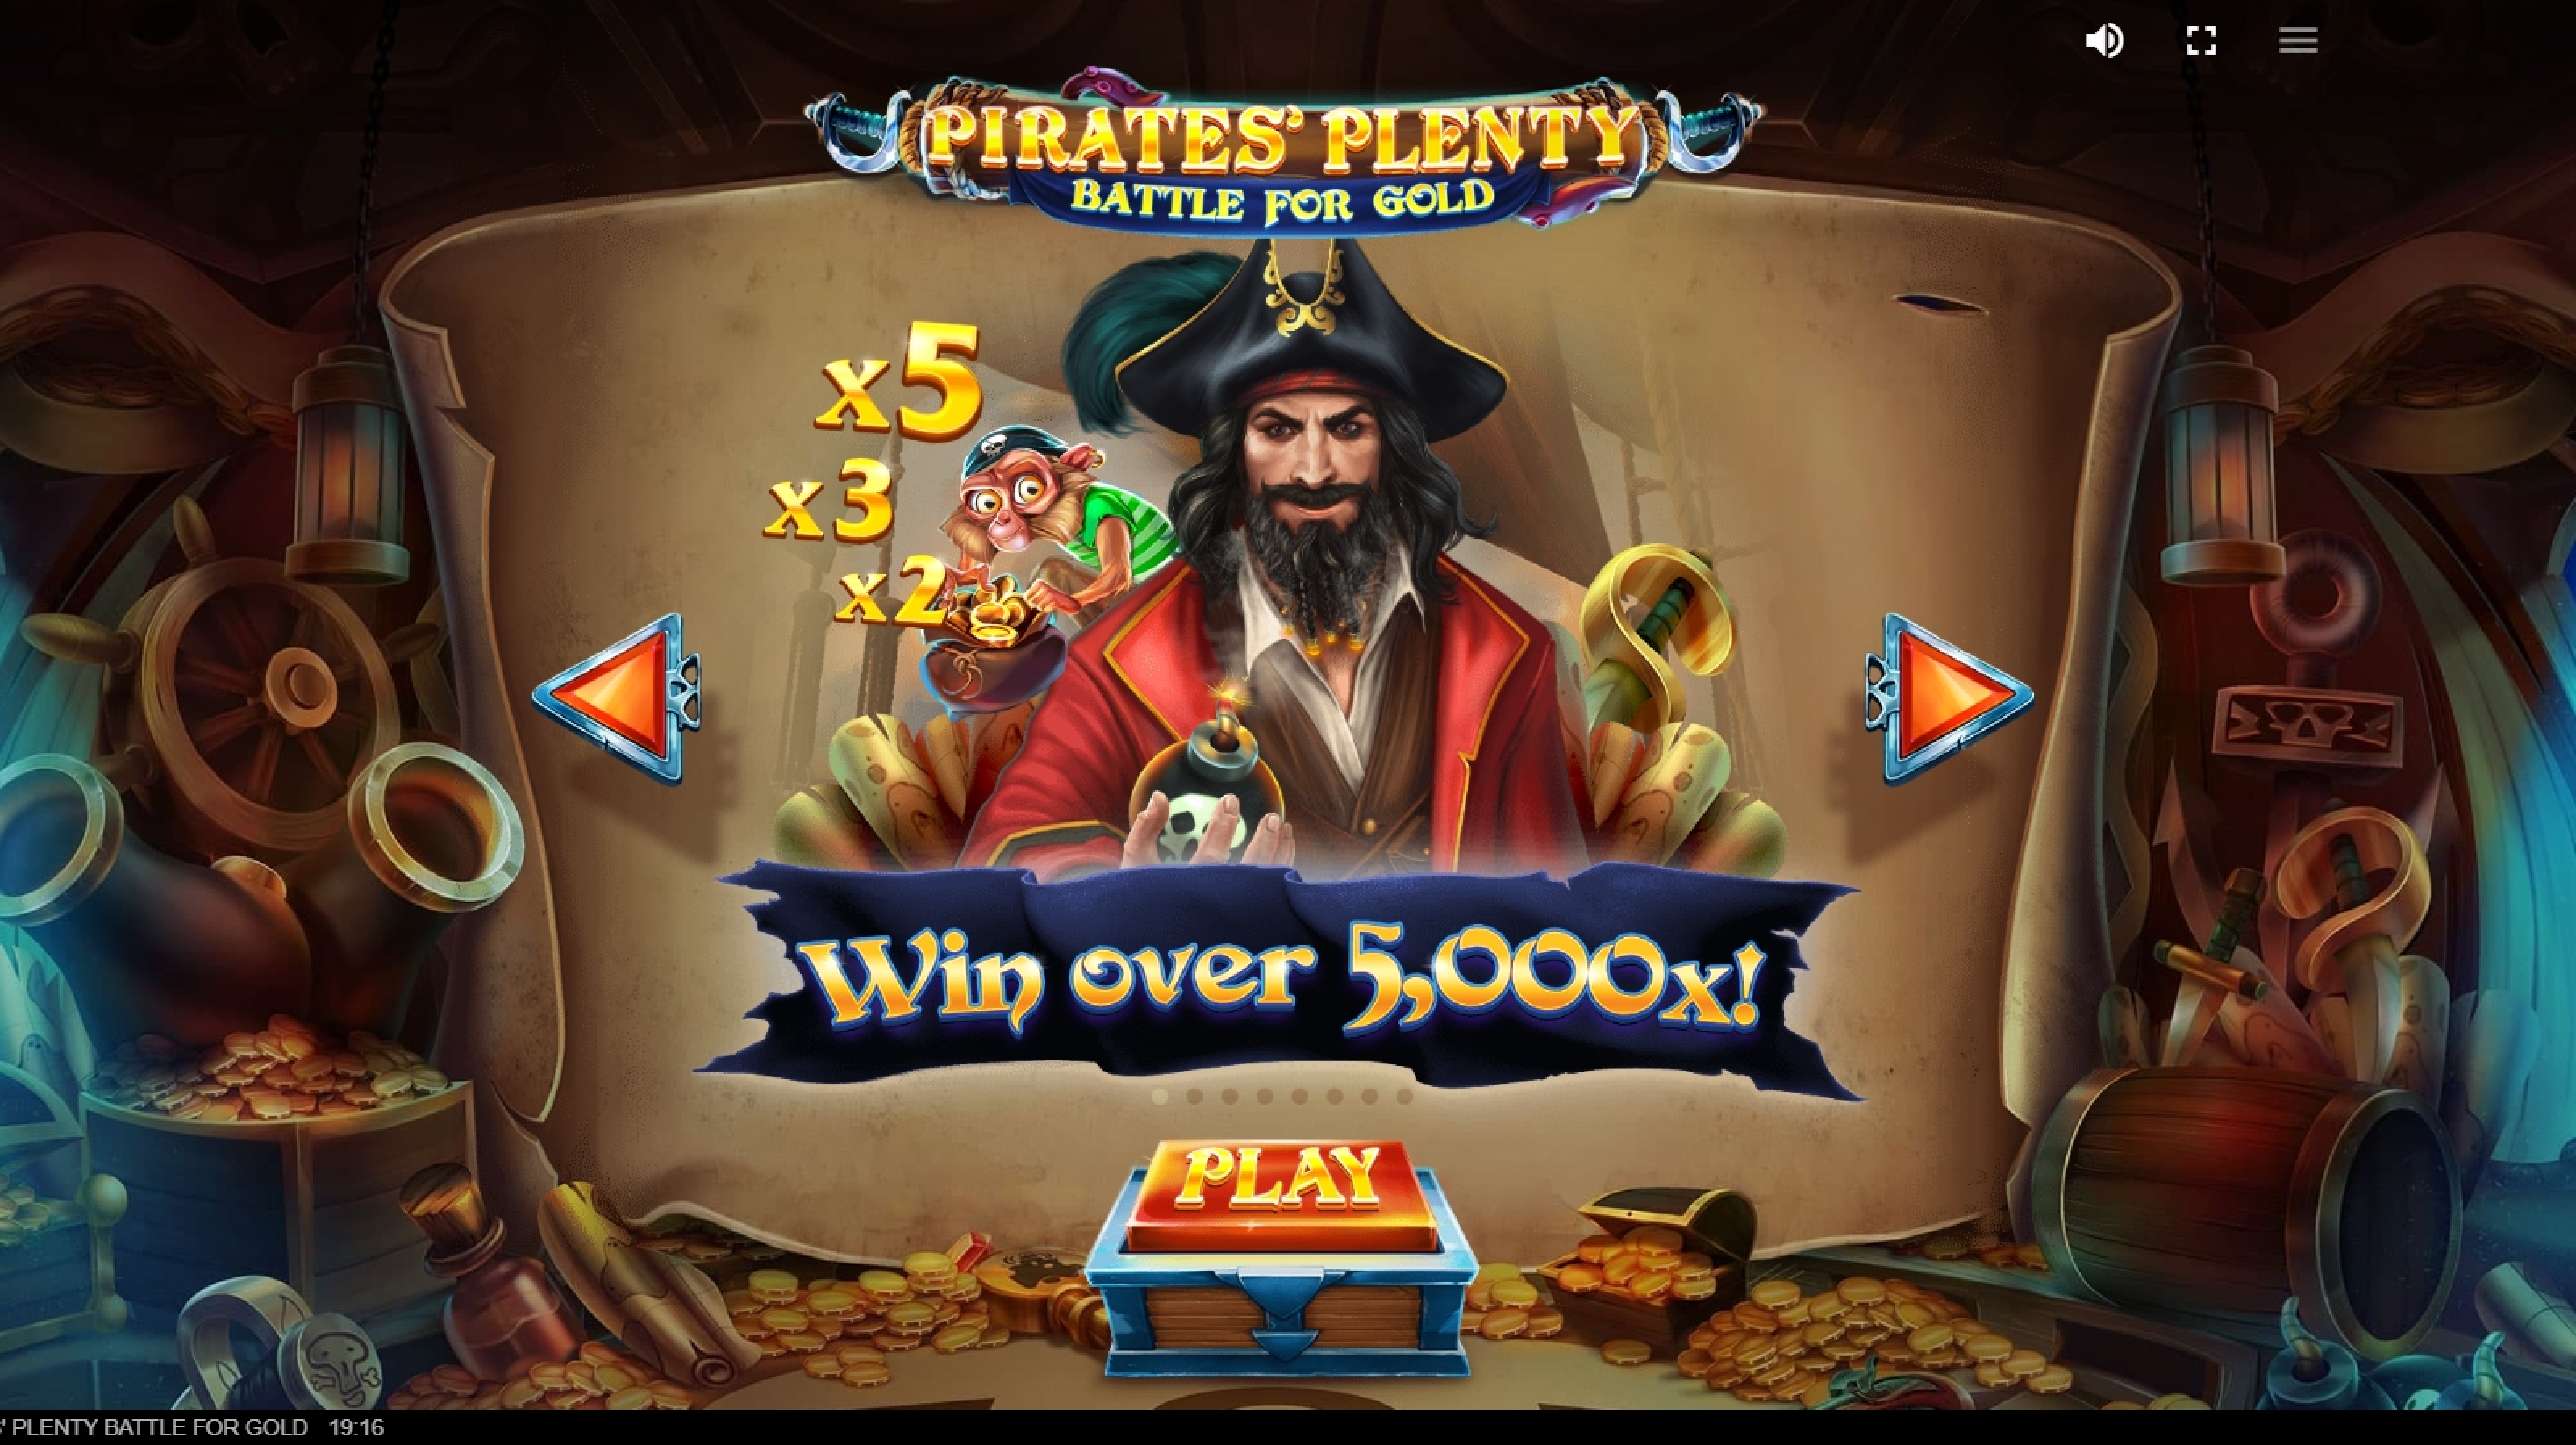 Play Pirates Plenty Battle for Gold Free Casino Slot Game by Red Tiger Gaming